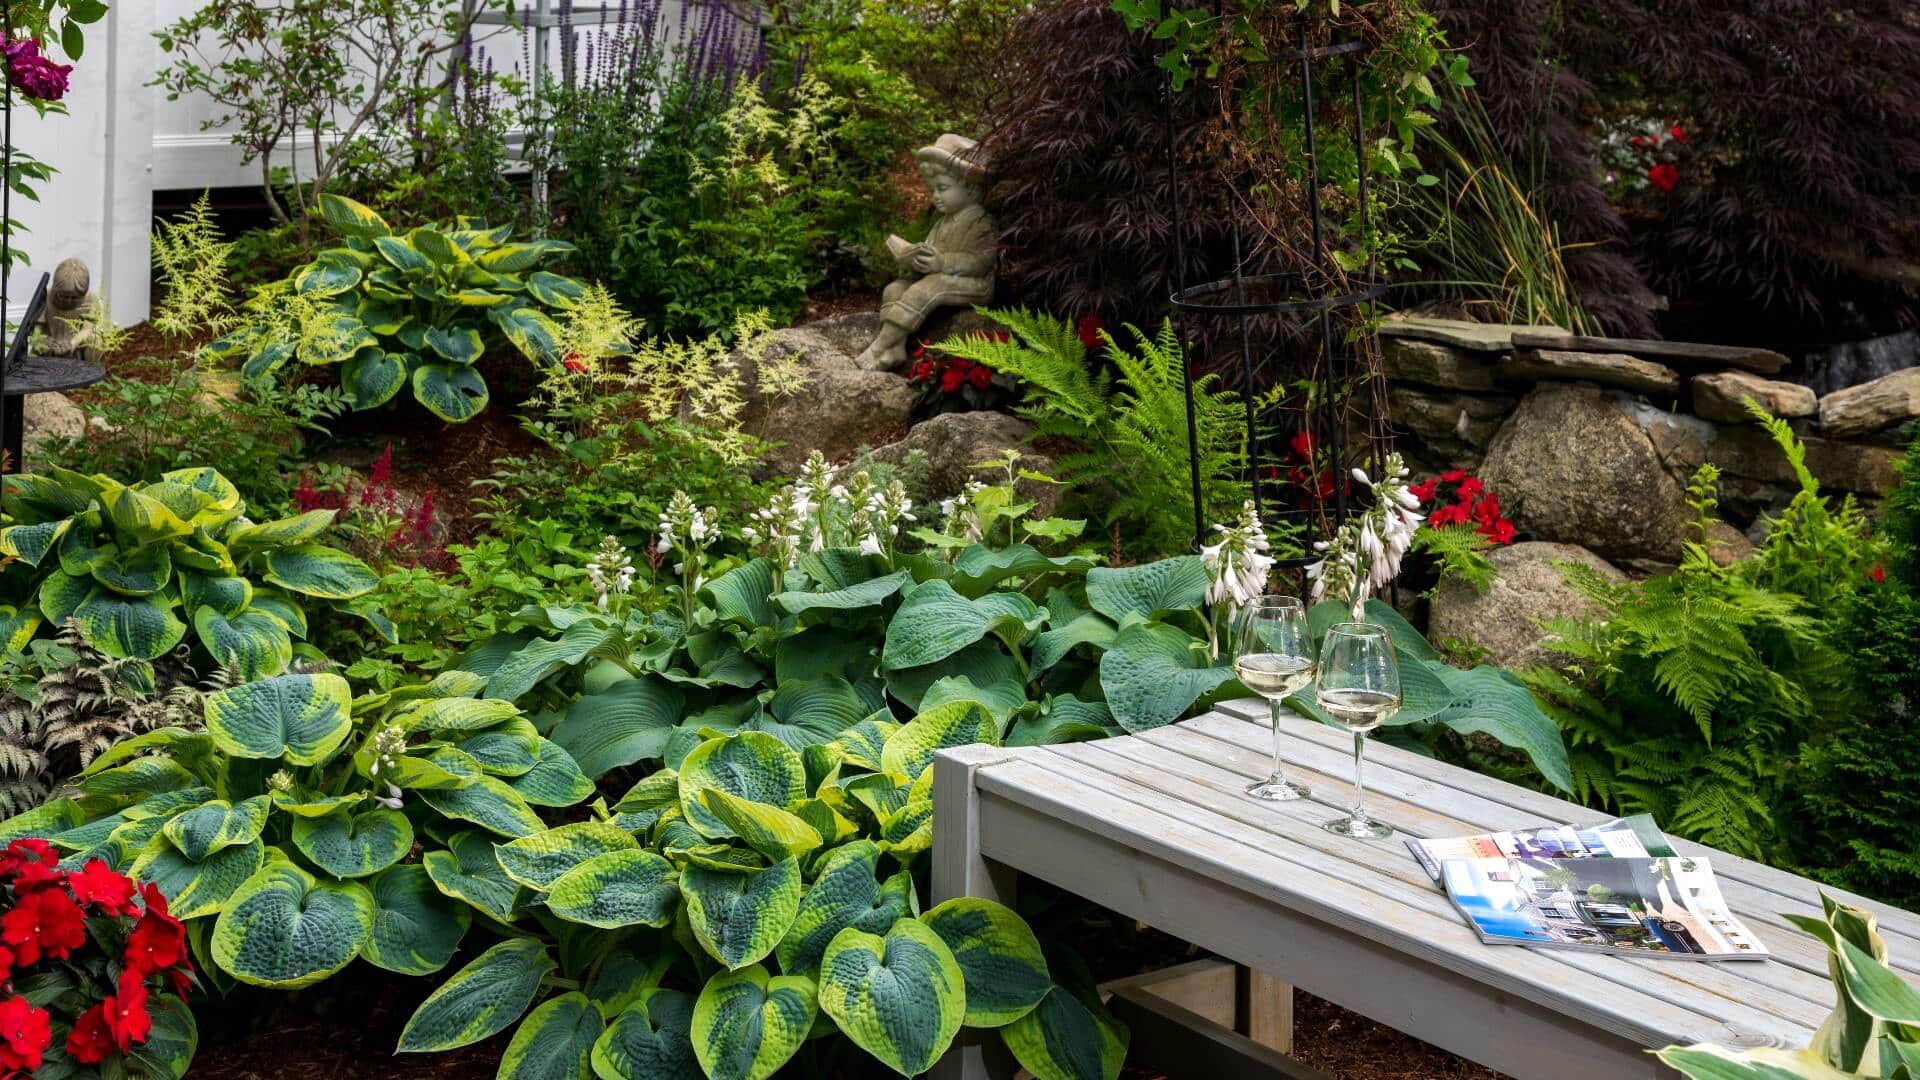 Backyard pond with hostas and rocks and sitting bench with wine glasses and open magazine